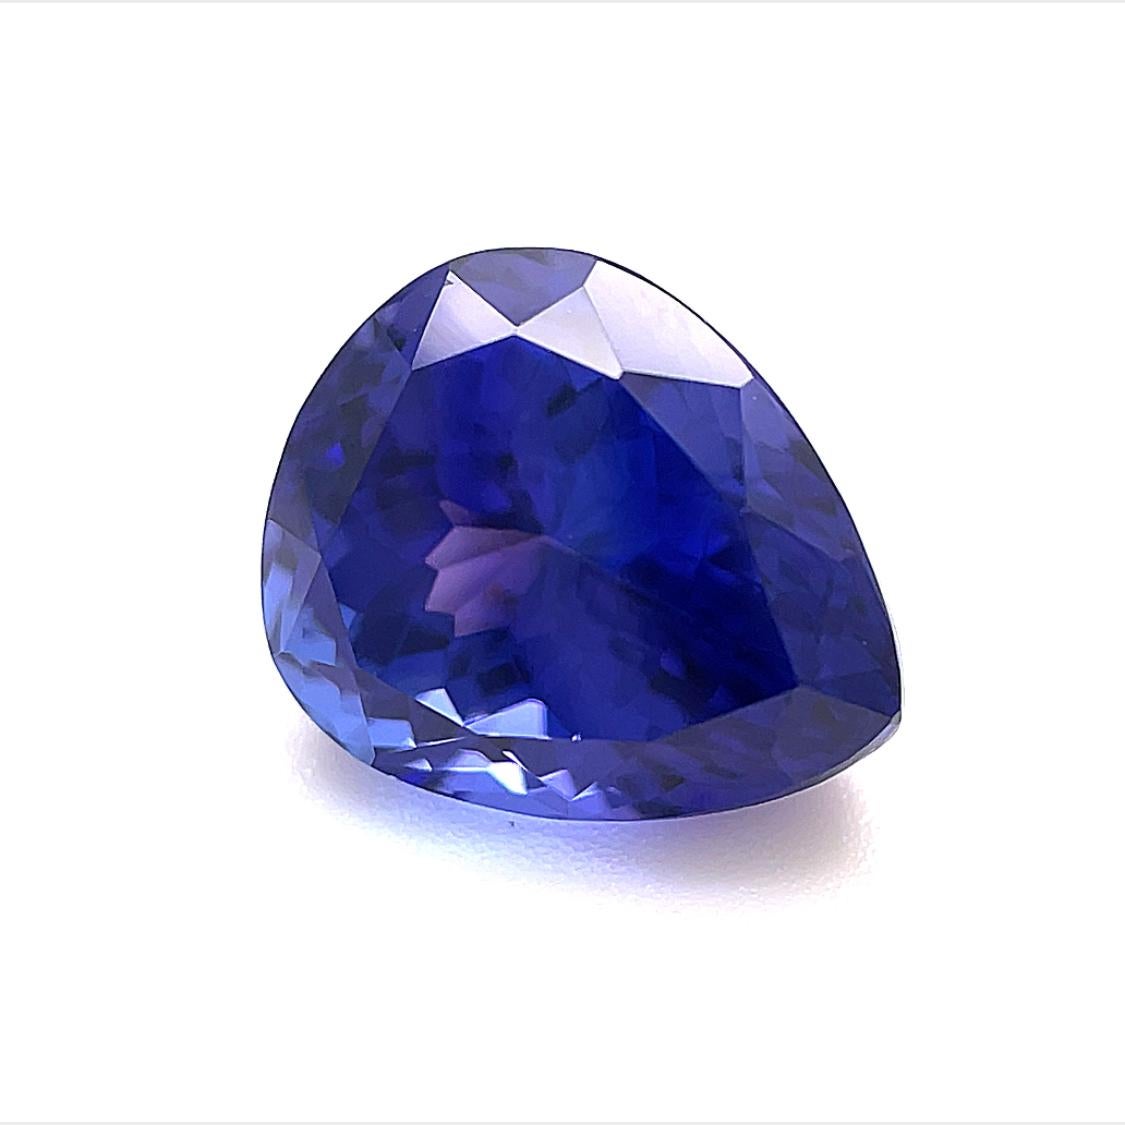 Pear Cut 3.66 Carat Unset Loose Pear Shaped Unmounted Tanzanite Gemstone For Sale